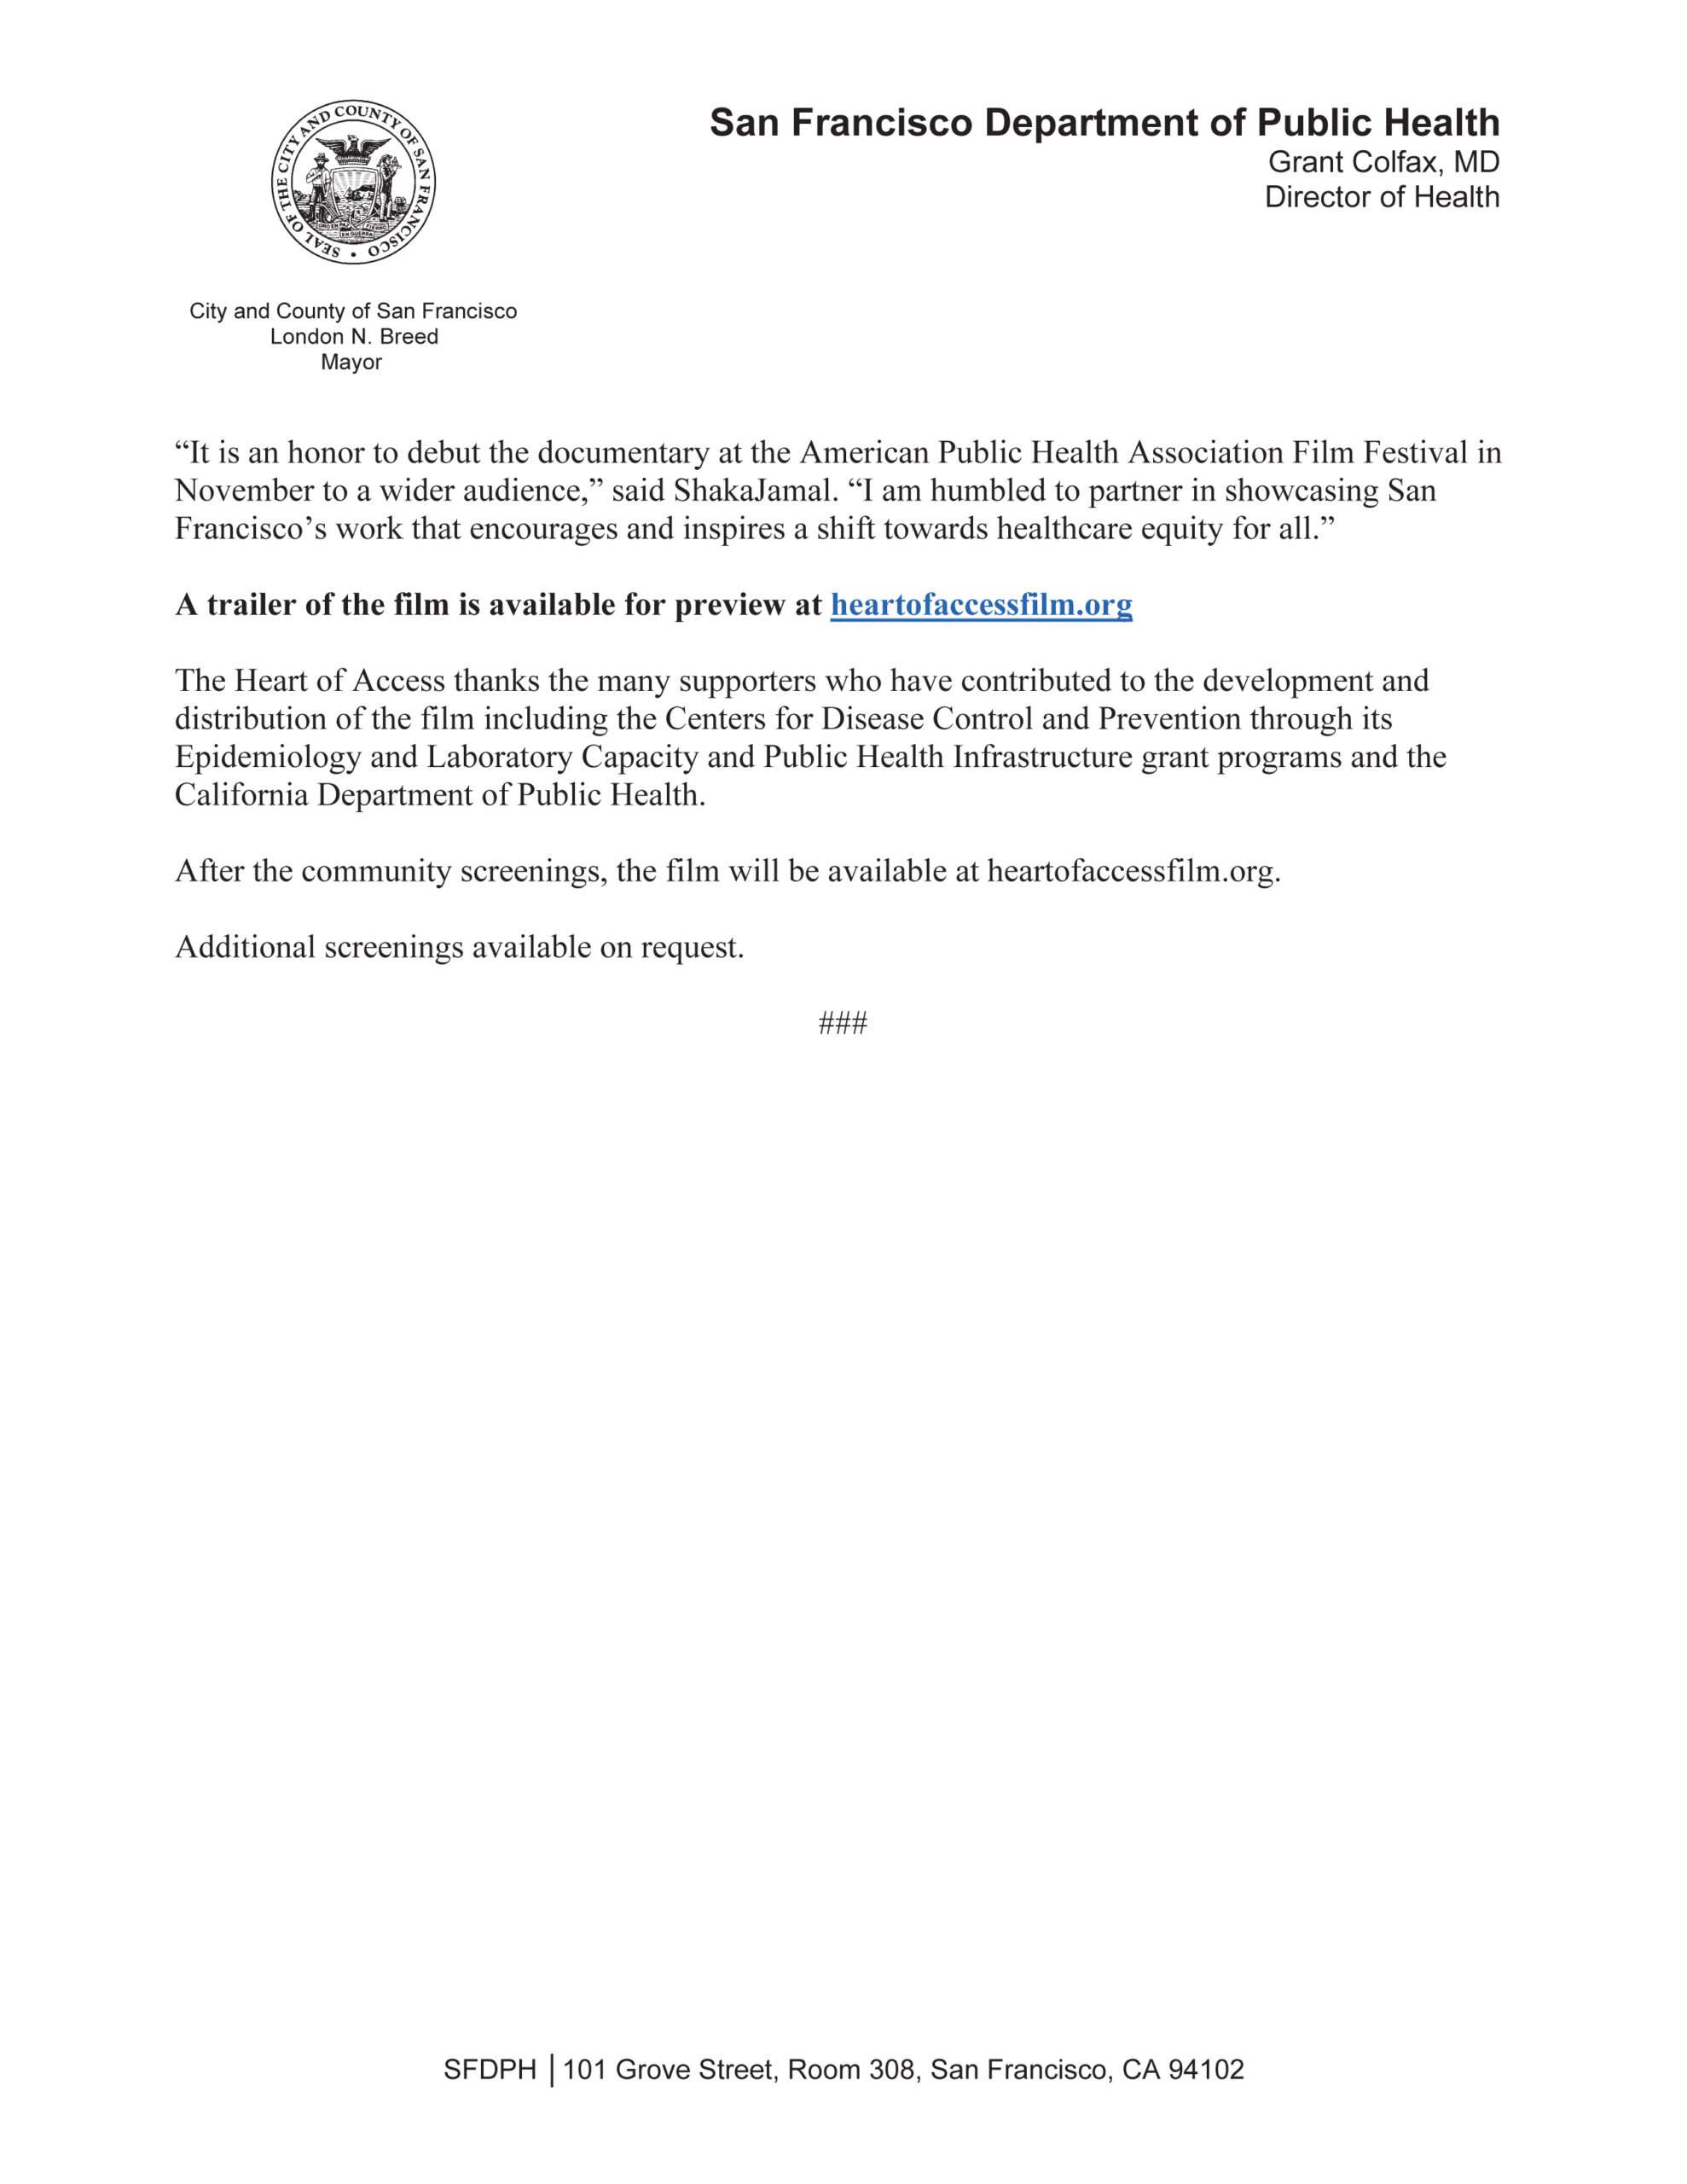 Heart of Access Press Release Page 3